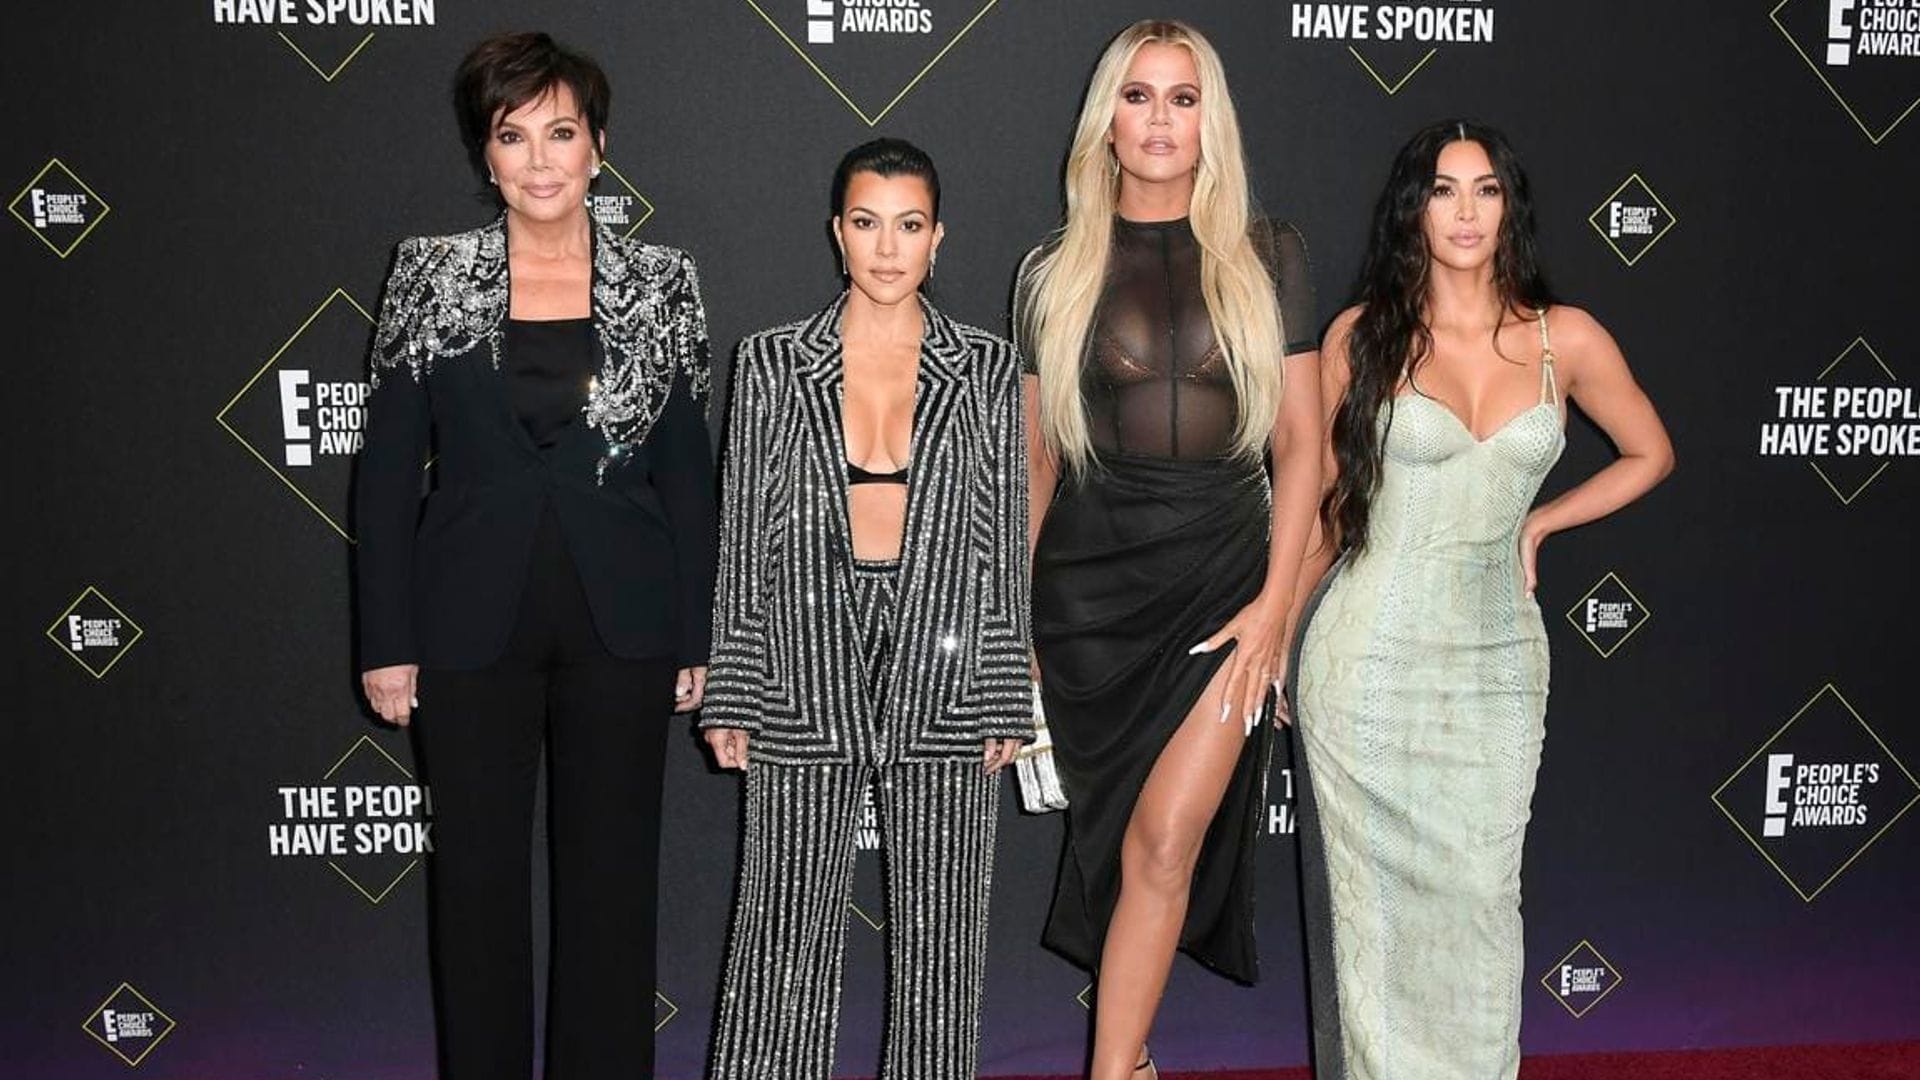 Keeping Up With The Kardashians comes to an end after 14 years